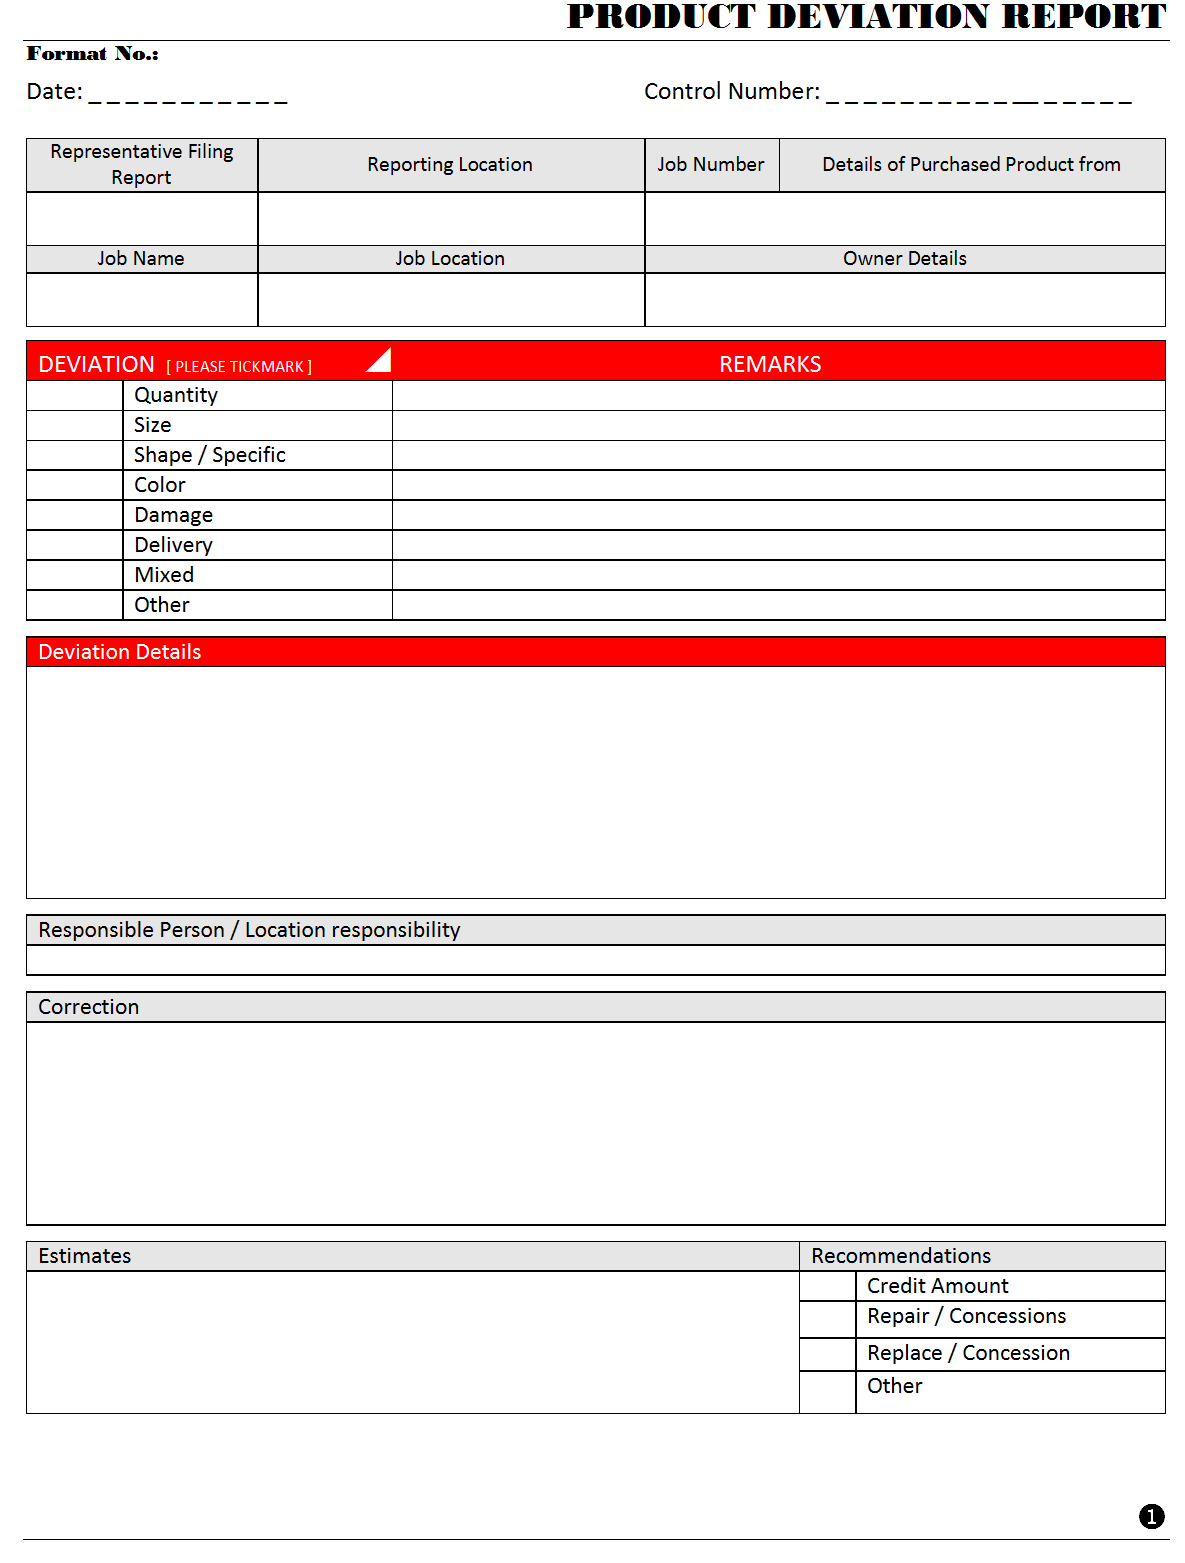 Product Deviation Report – Within Deviation Report Template